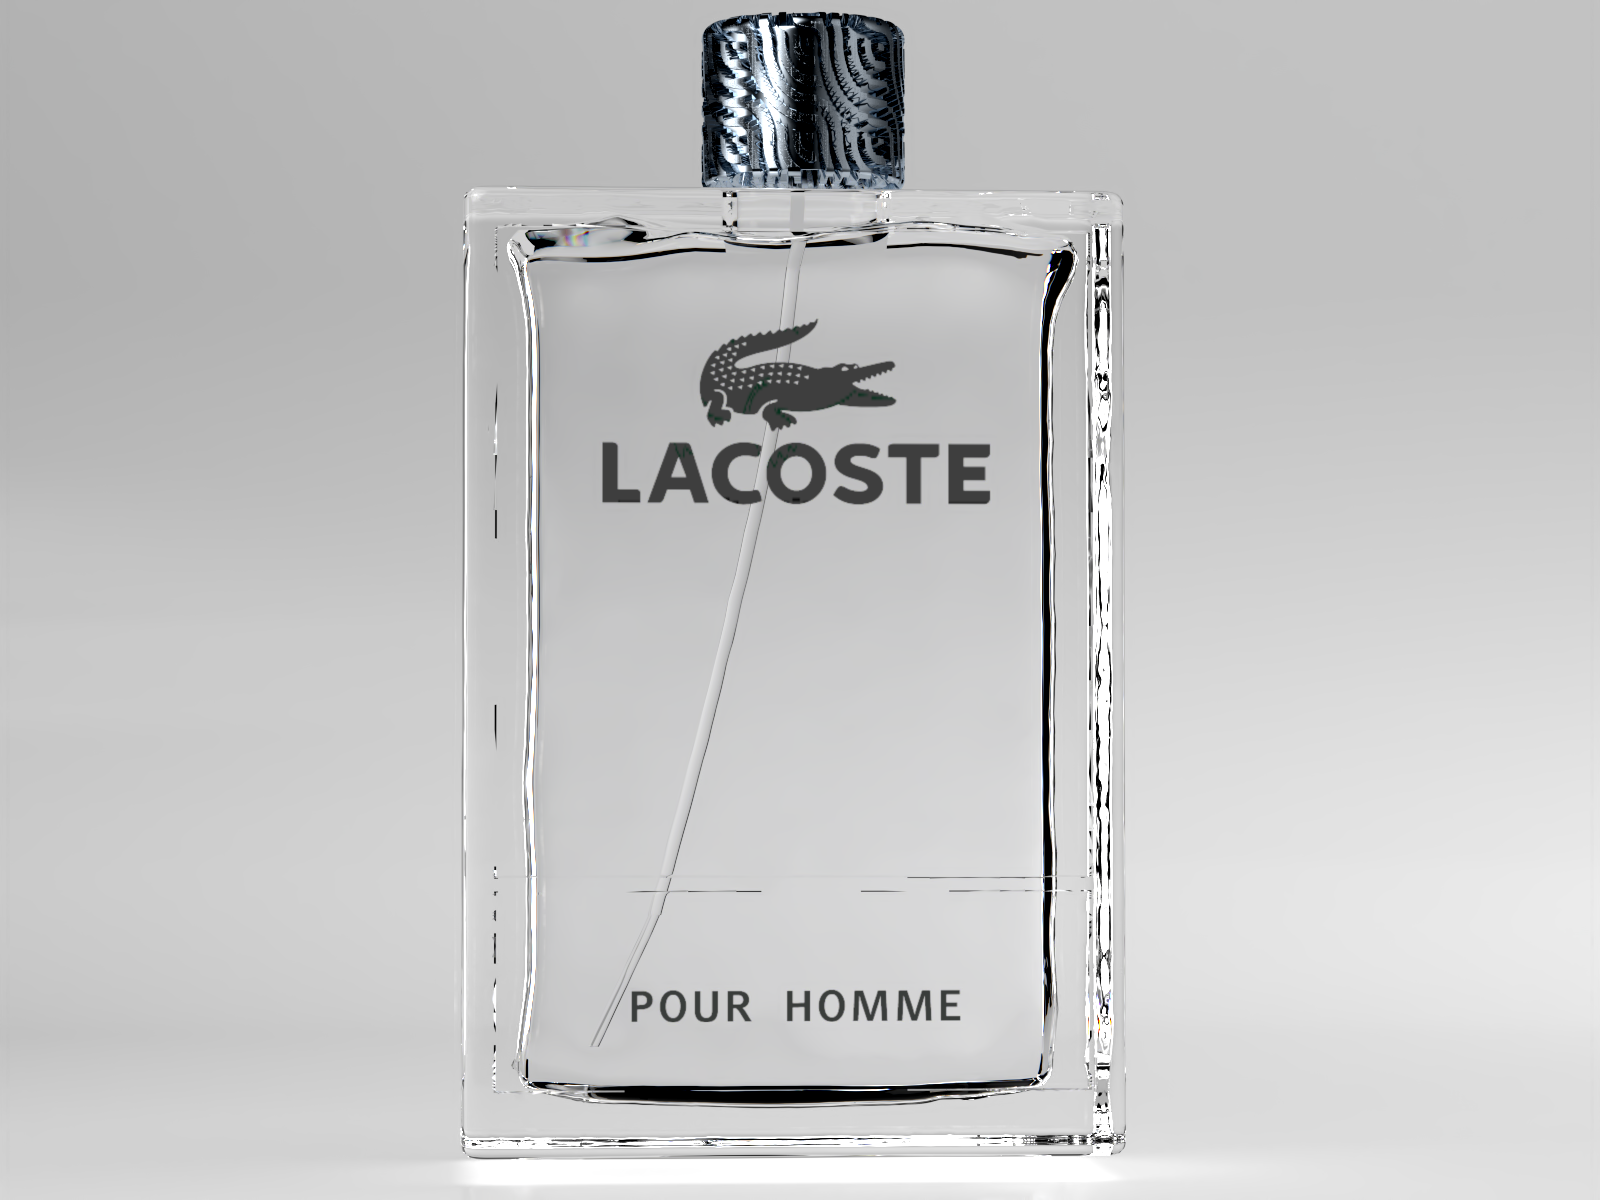 Lacoste cologne by M. on Dribbble